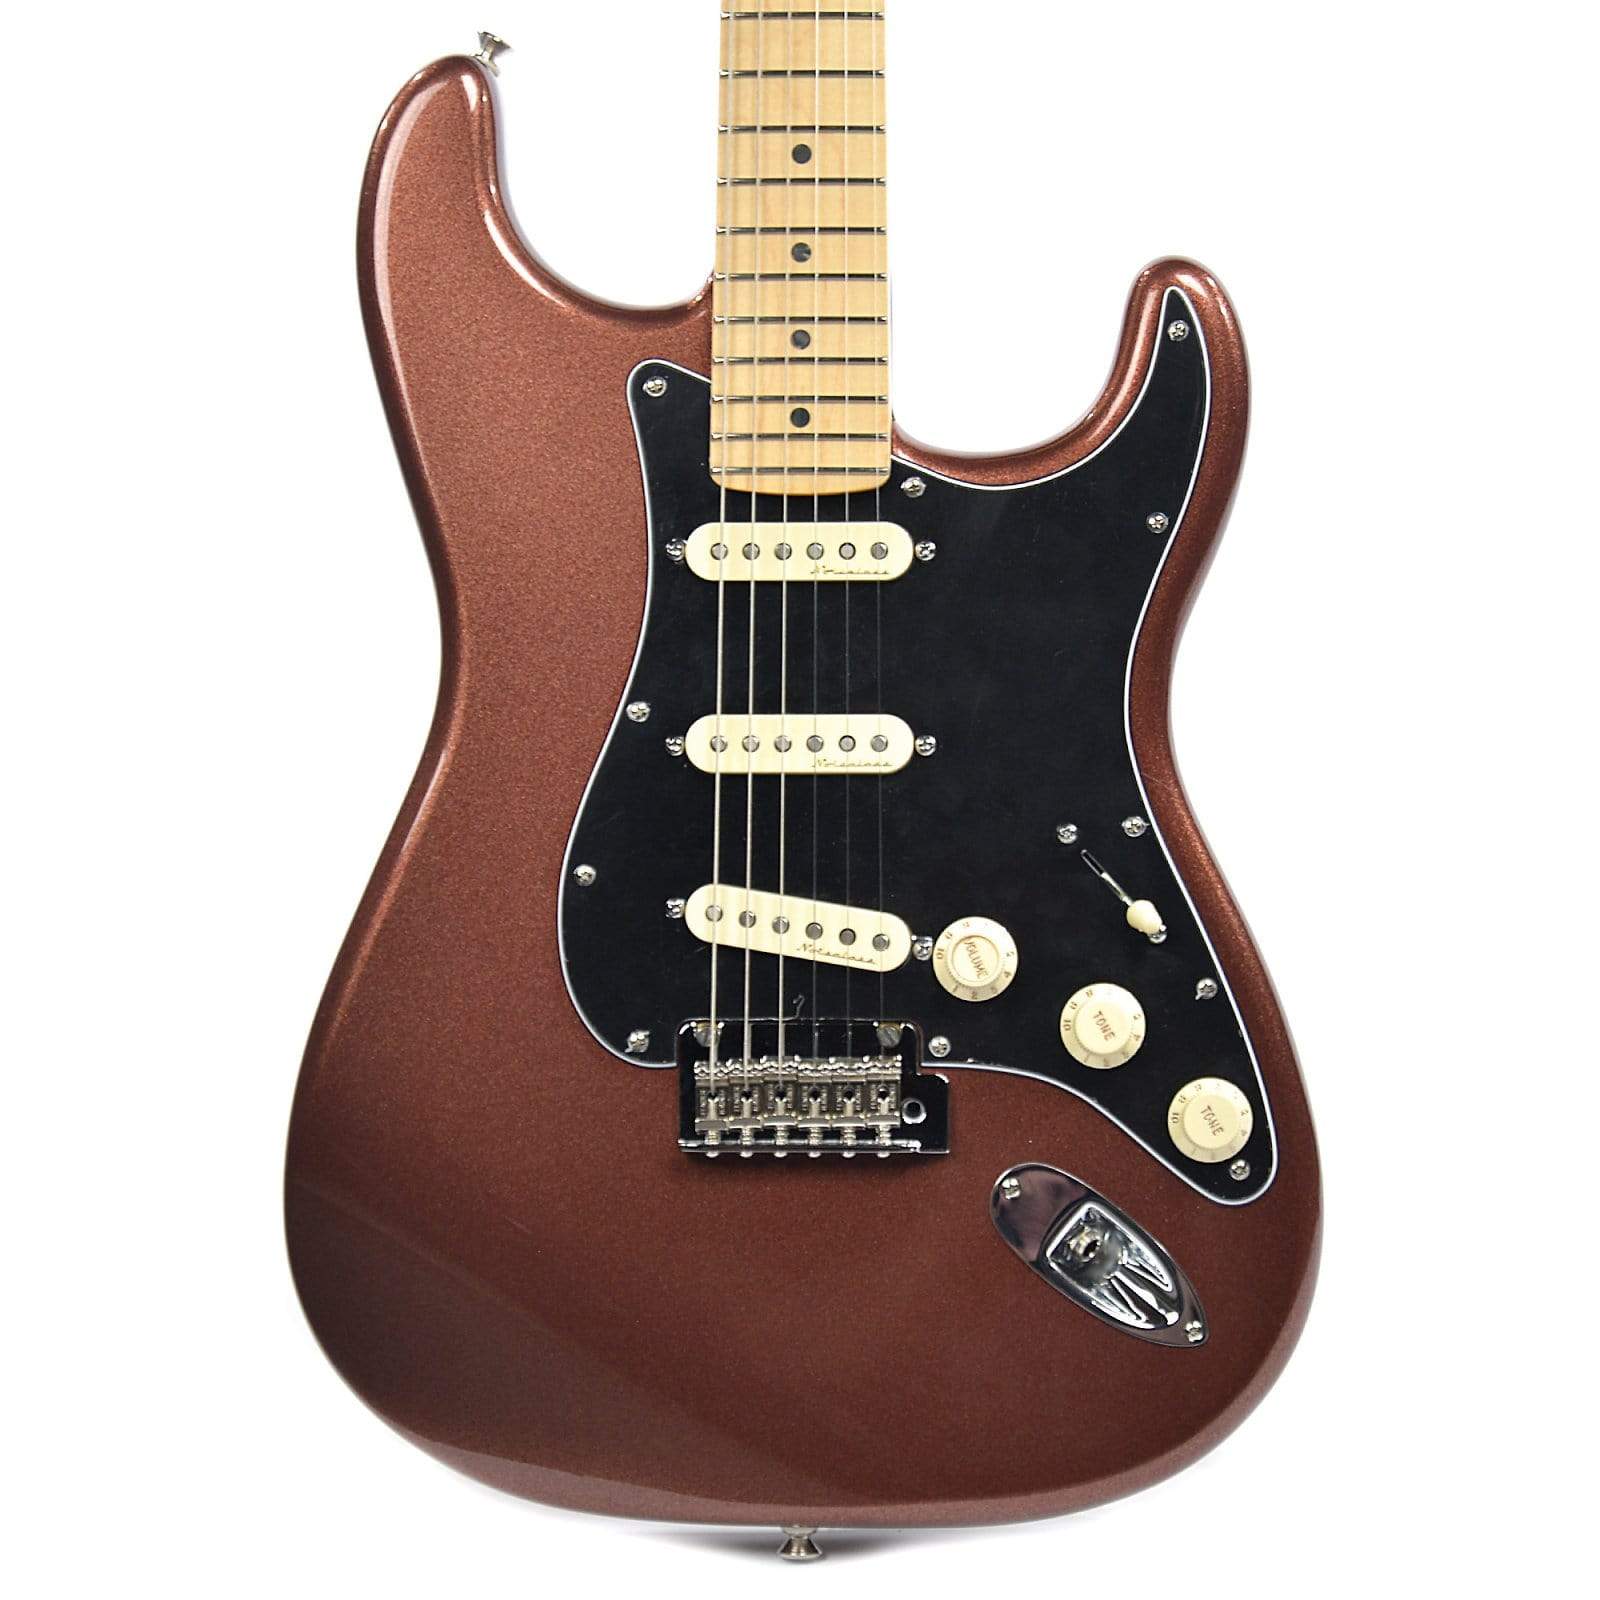 Fender　Stratocaster　Deluxe　Roadhouse　–　Classic　Copper　Exchange　Chicago　Music